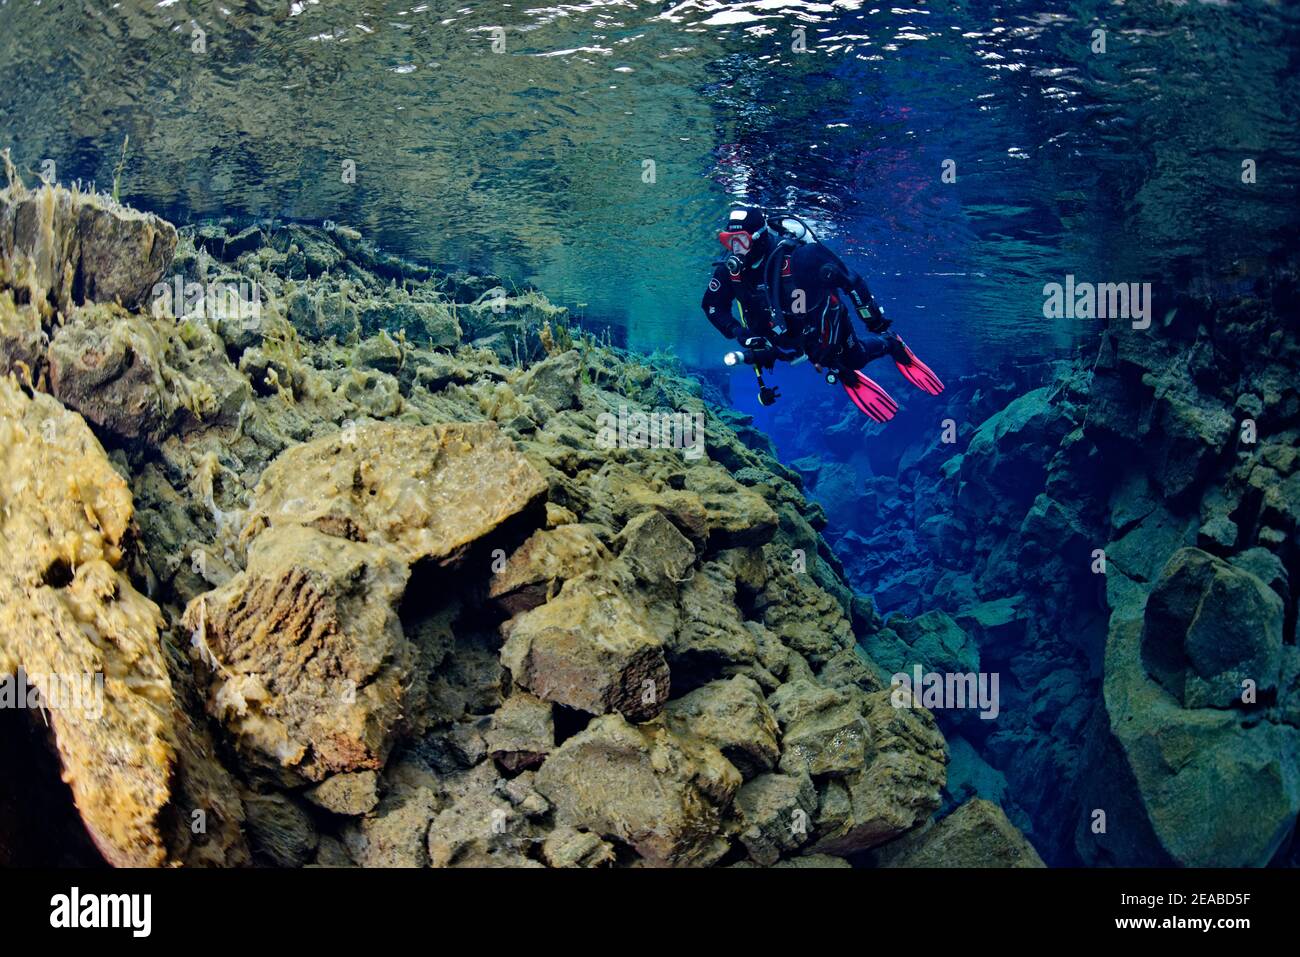 Silfra Fissure, diver in the continental fissure Silfra, diving between the continents, Thingvellir National Park, Iceland Silfra is a fissure, part of the diverging tectonic boundary between the North American and Eurasian plates Stock Photo